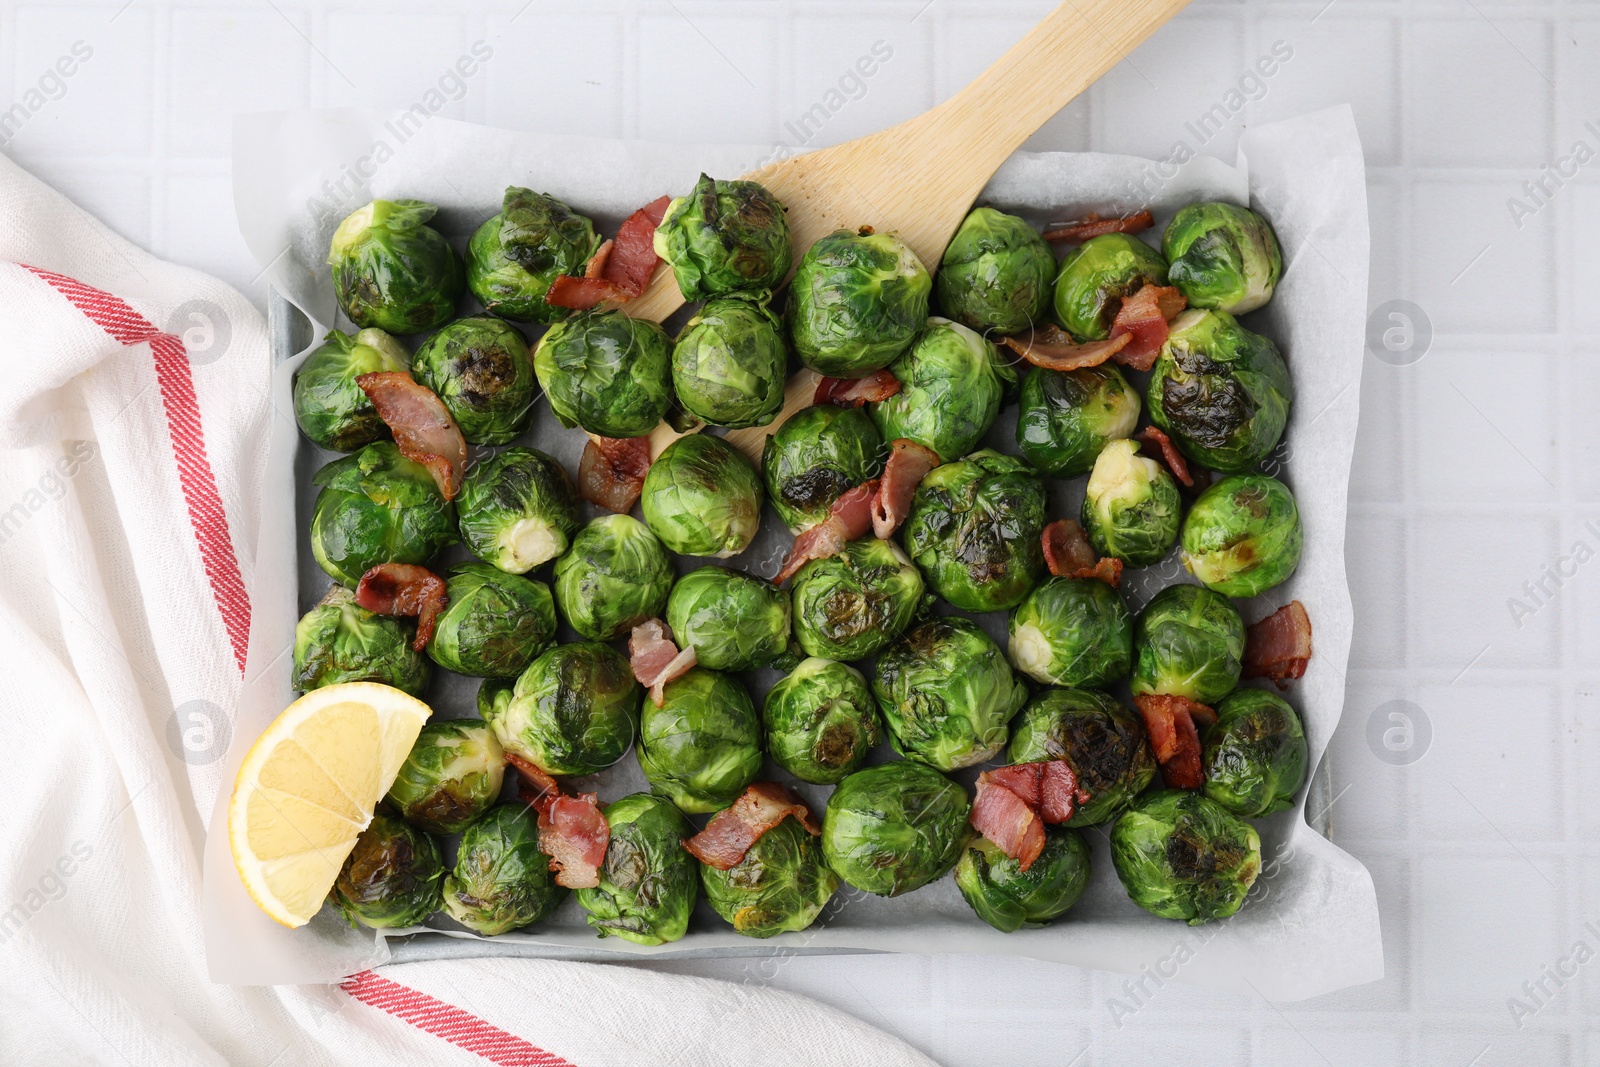 Photo of Delicious roasted Brussels sprouts, bacon, lemon and wooden spatula on white tiled table, top view